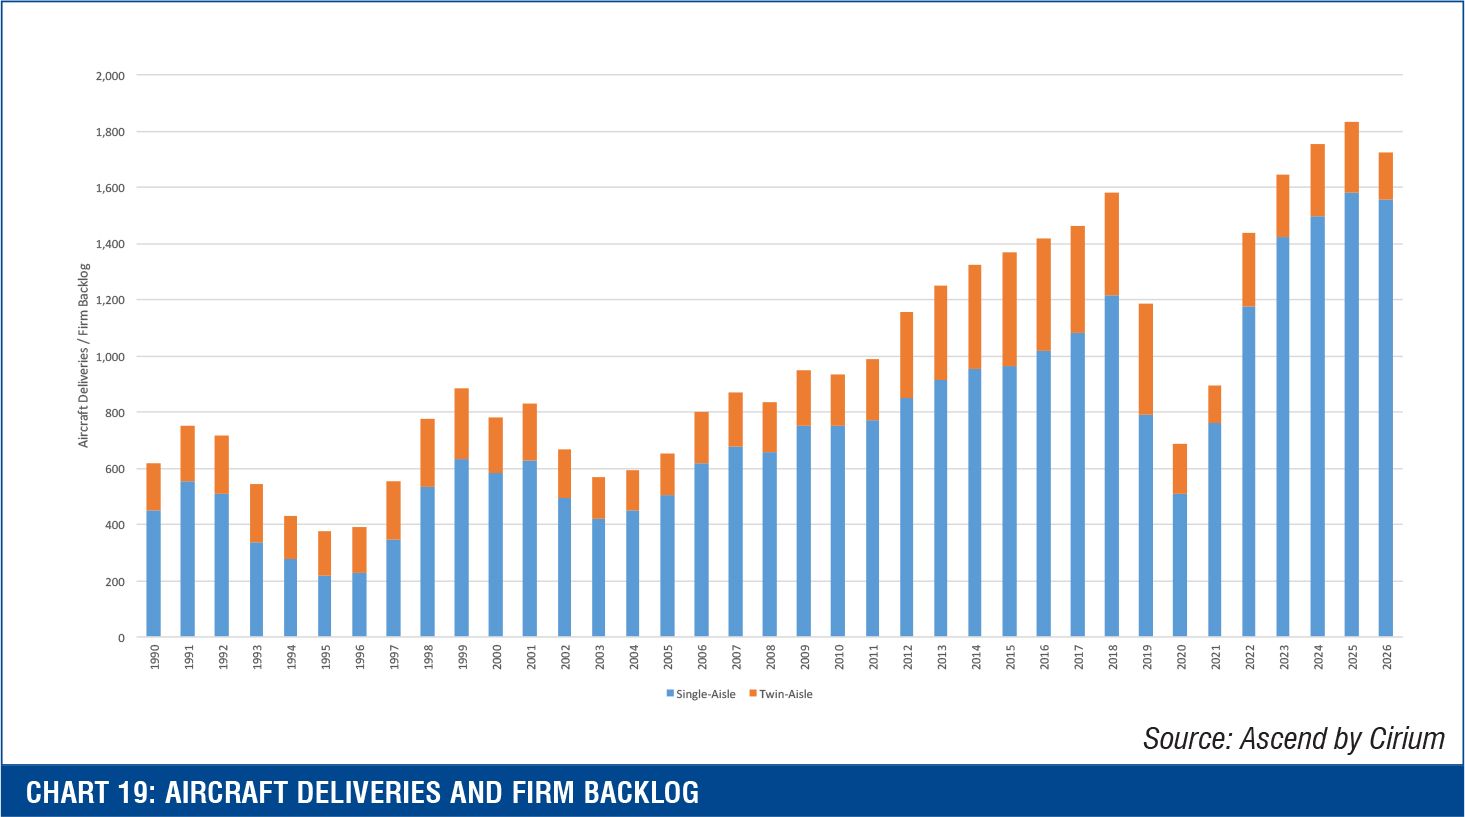 Chart 19: Aircraft deliveries and firm backlog